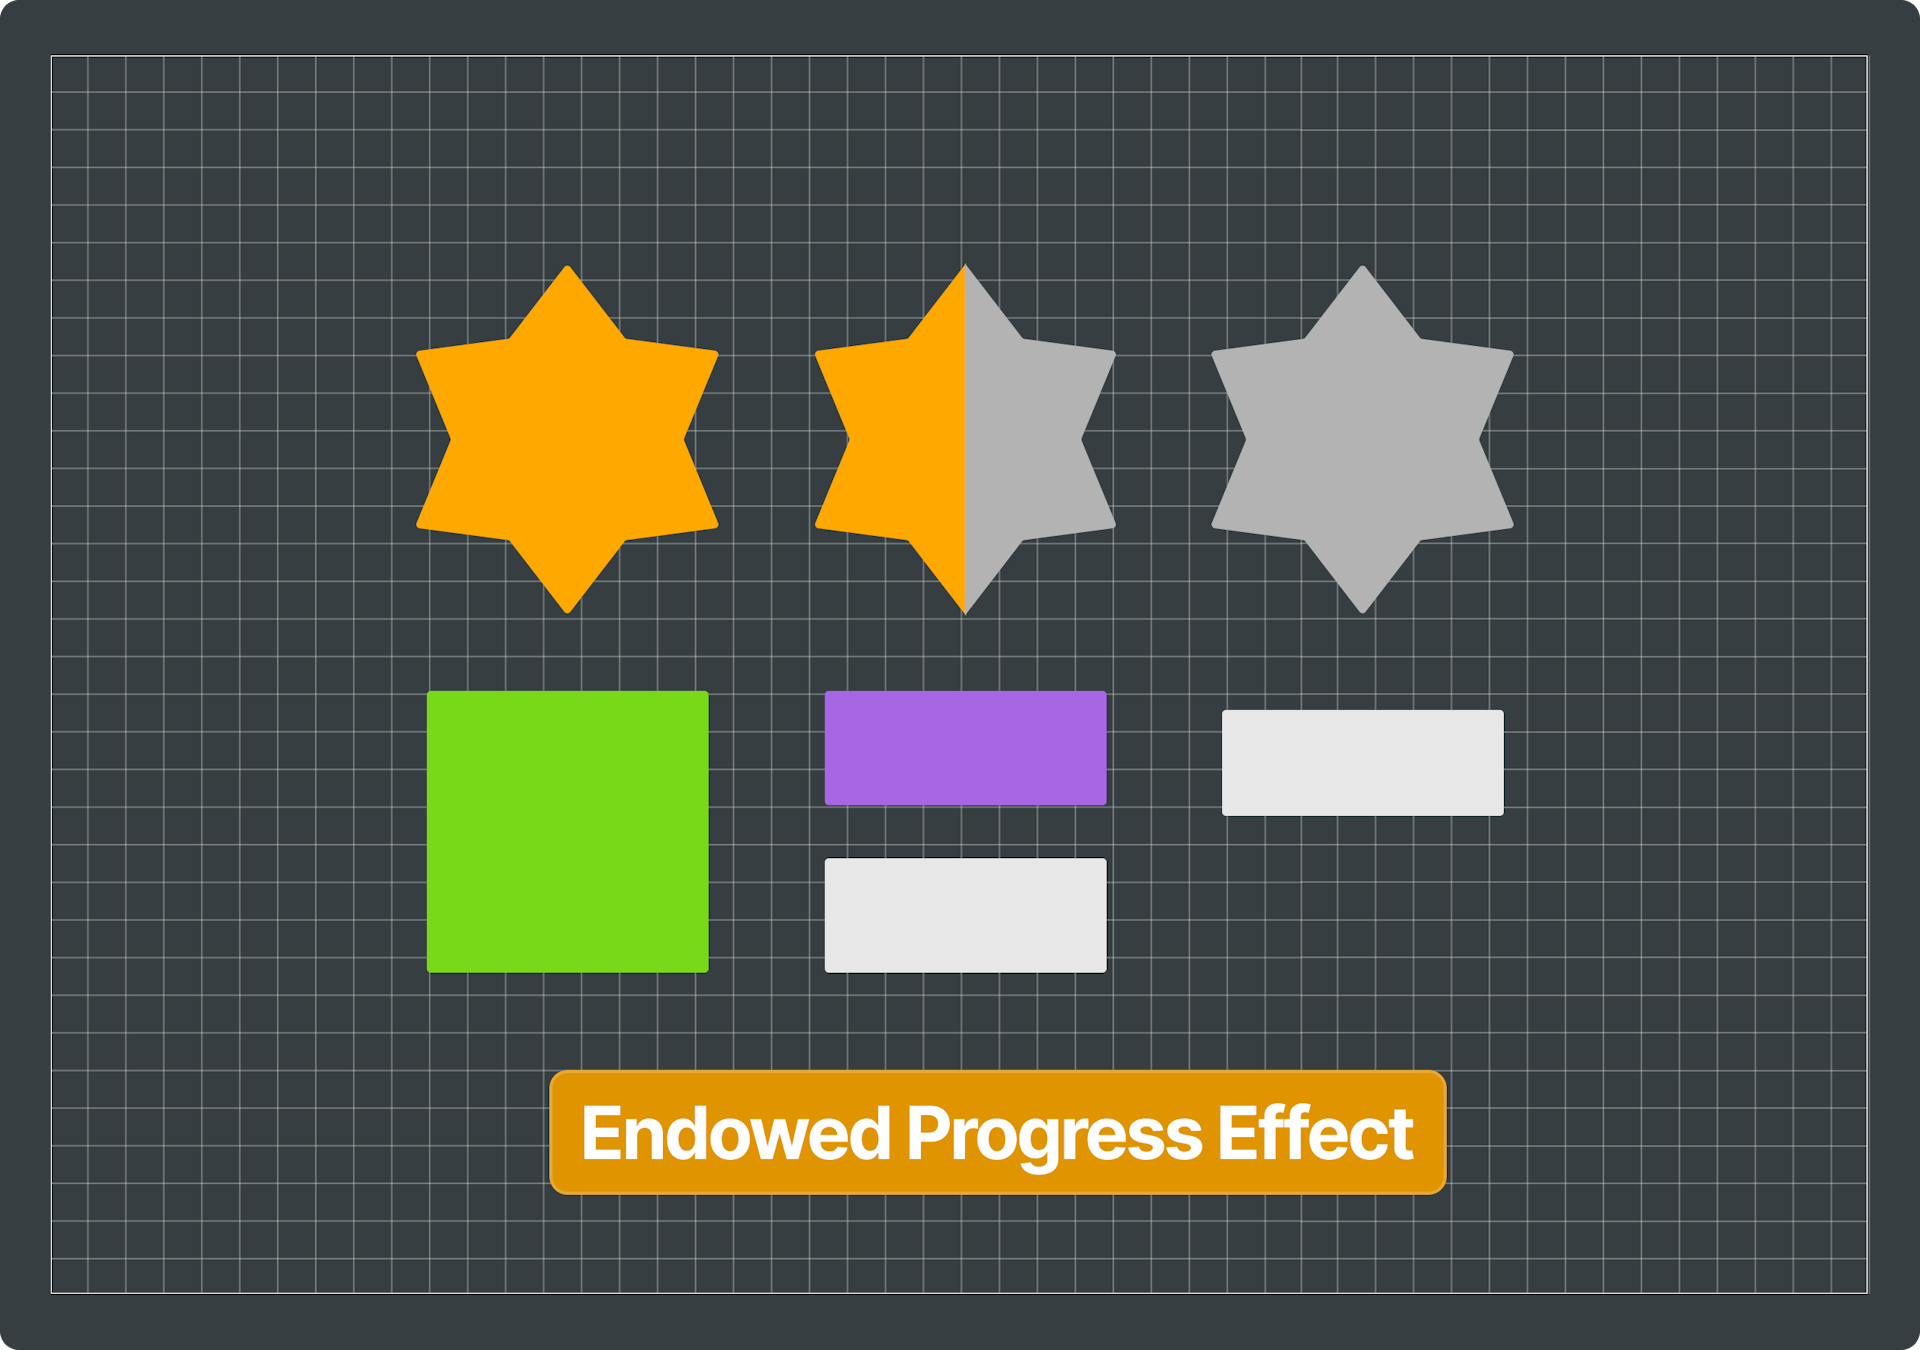 Illustration with three stars, one is yellow, one is half yellow and grey, and the other is grey to represent progress. Includes text that says "Endowed Progress Effect".